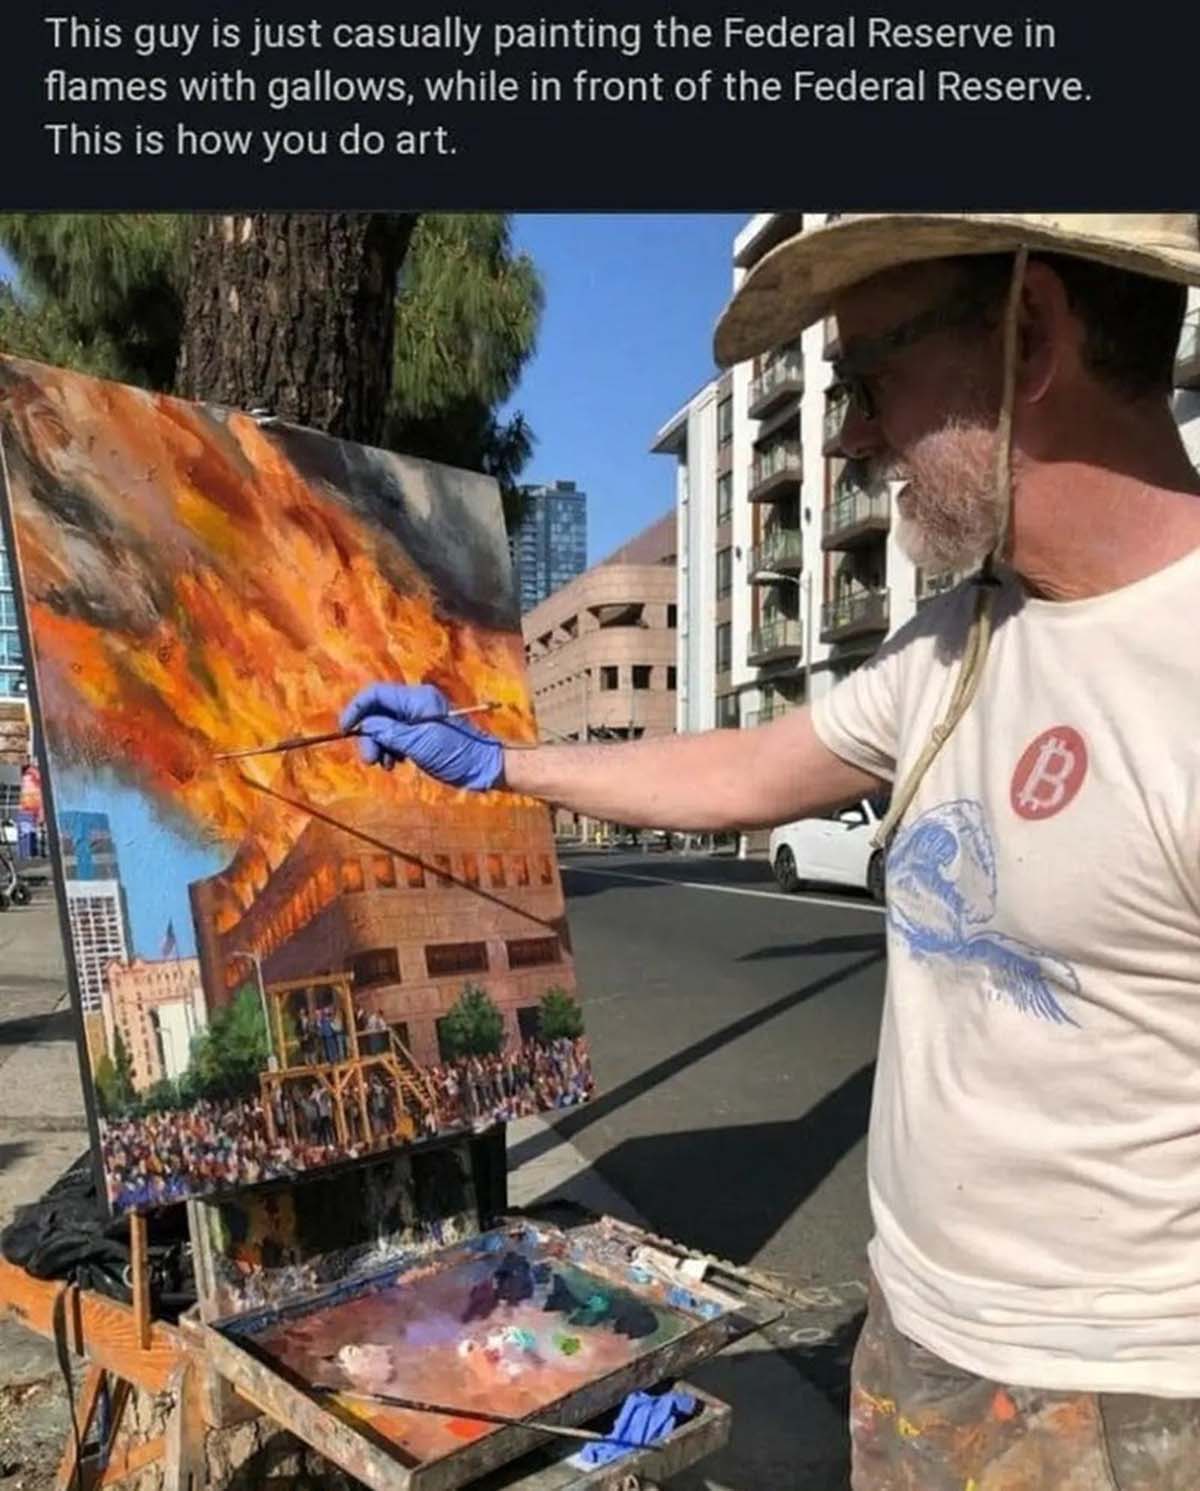 federal reserve gallows - This guy is just casually painting the Federal Reserve in flames with gallows, while in front of the Federal Reserve. This is how you do art.